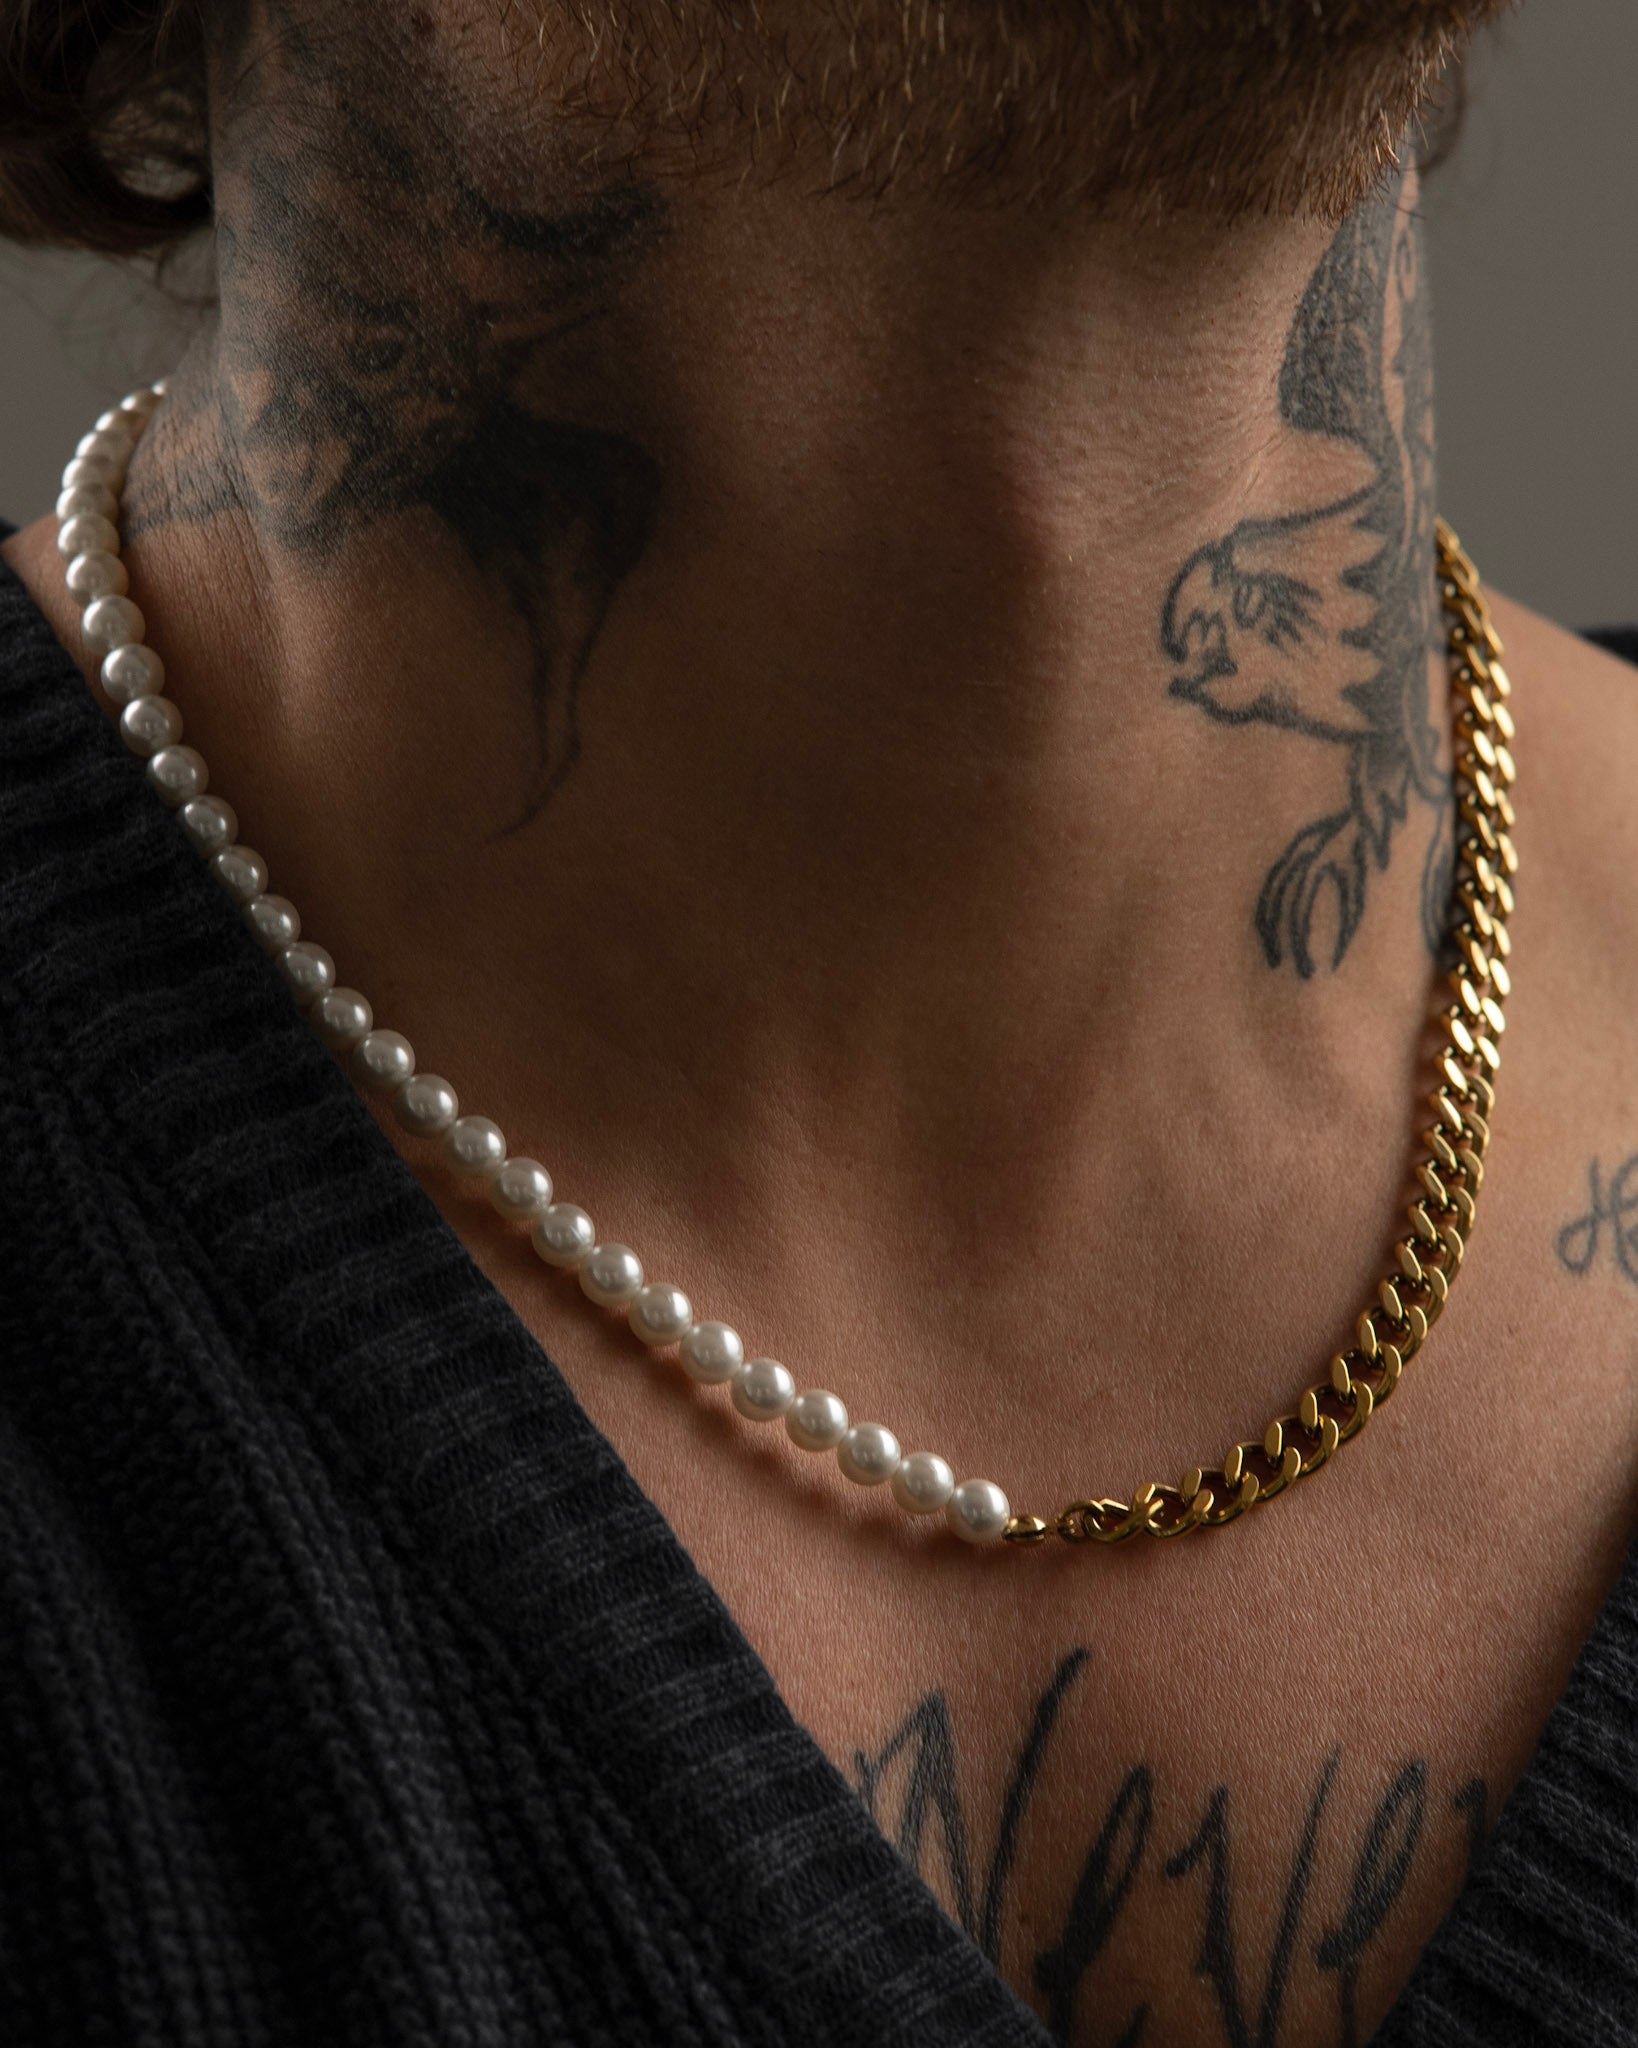 Volga men's necklace by Five Jwlry, uniquely crafted with a combination of half gold Cuban chain and half white pearls, measuring 50cm in length. Made from water-resistant 316L stainless steel. Hypoallergenic with a 2-year warranty.